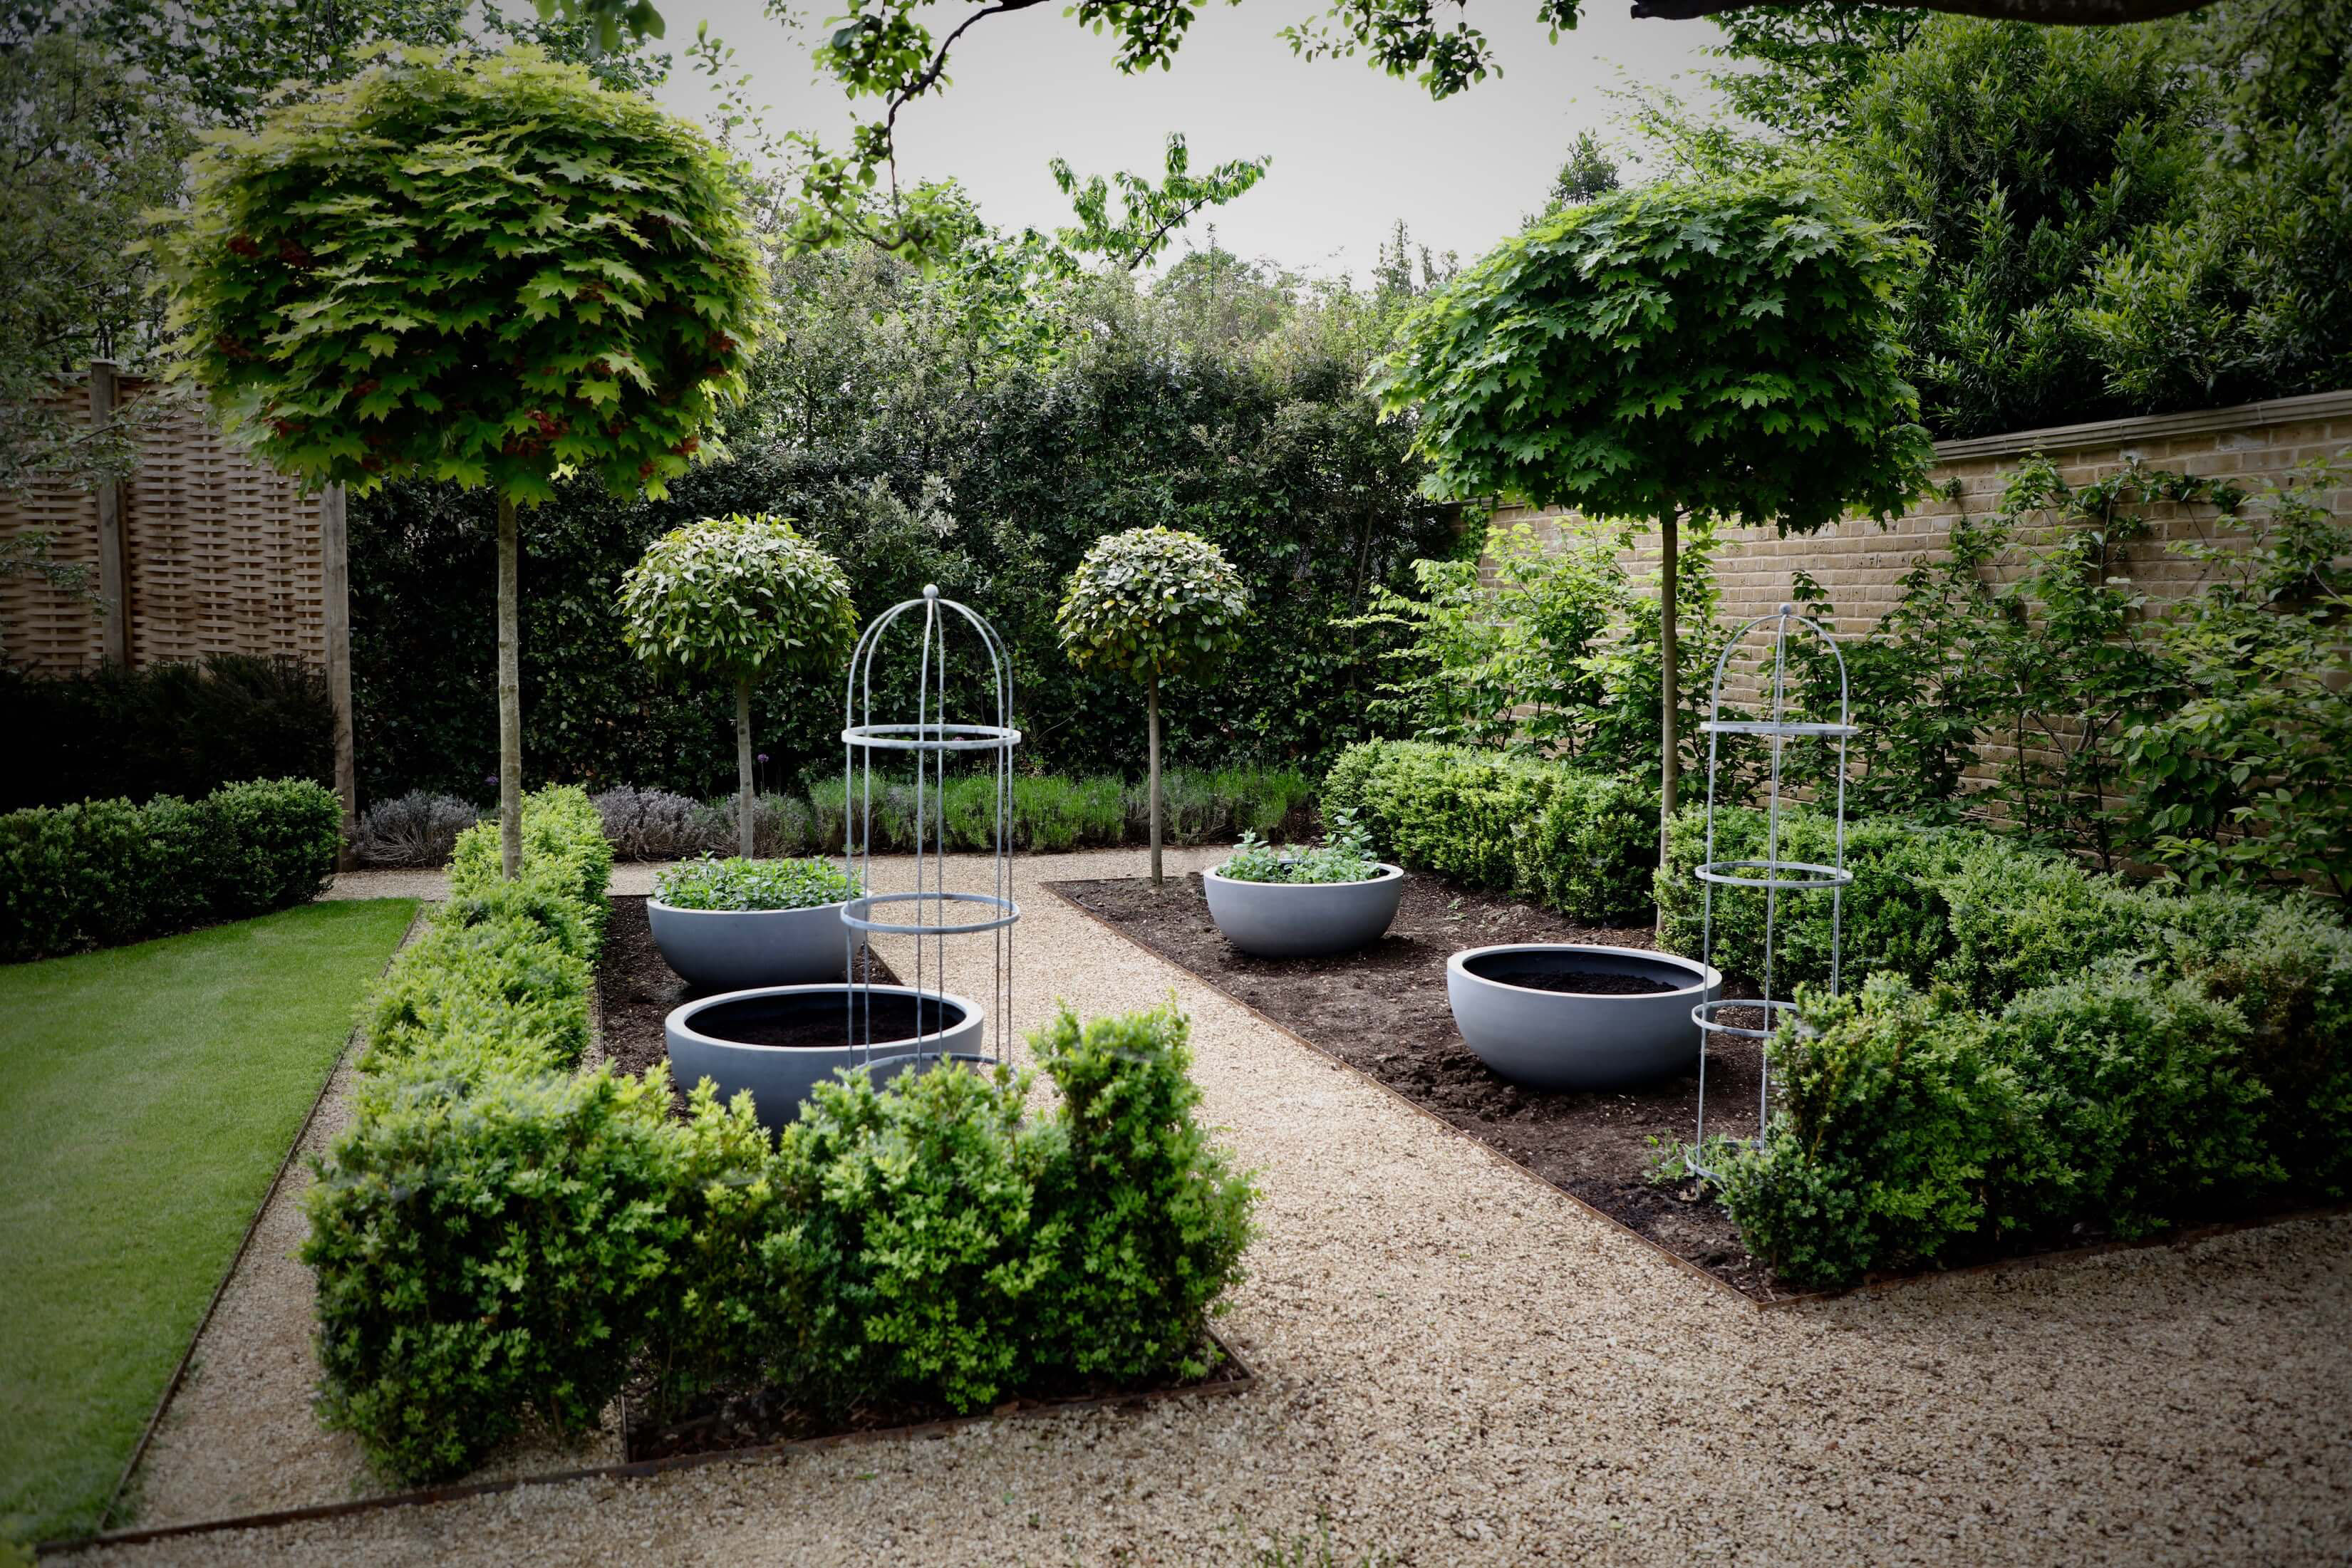 townhouse garden in Oxford productive garden with obelisks and bowl planters